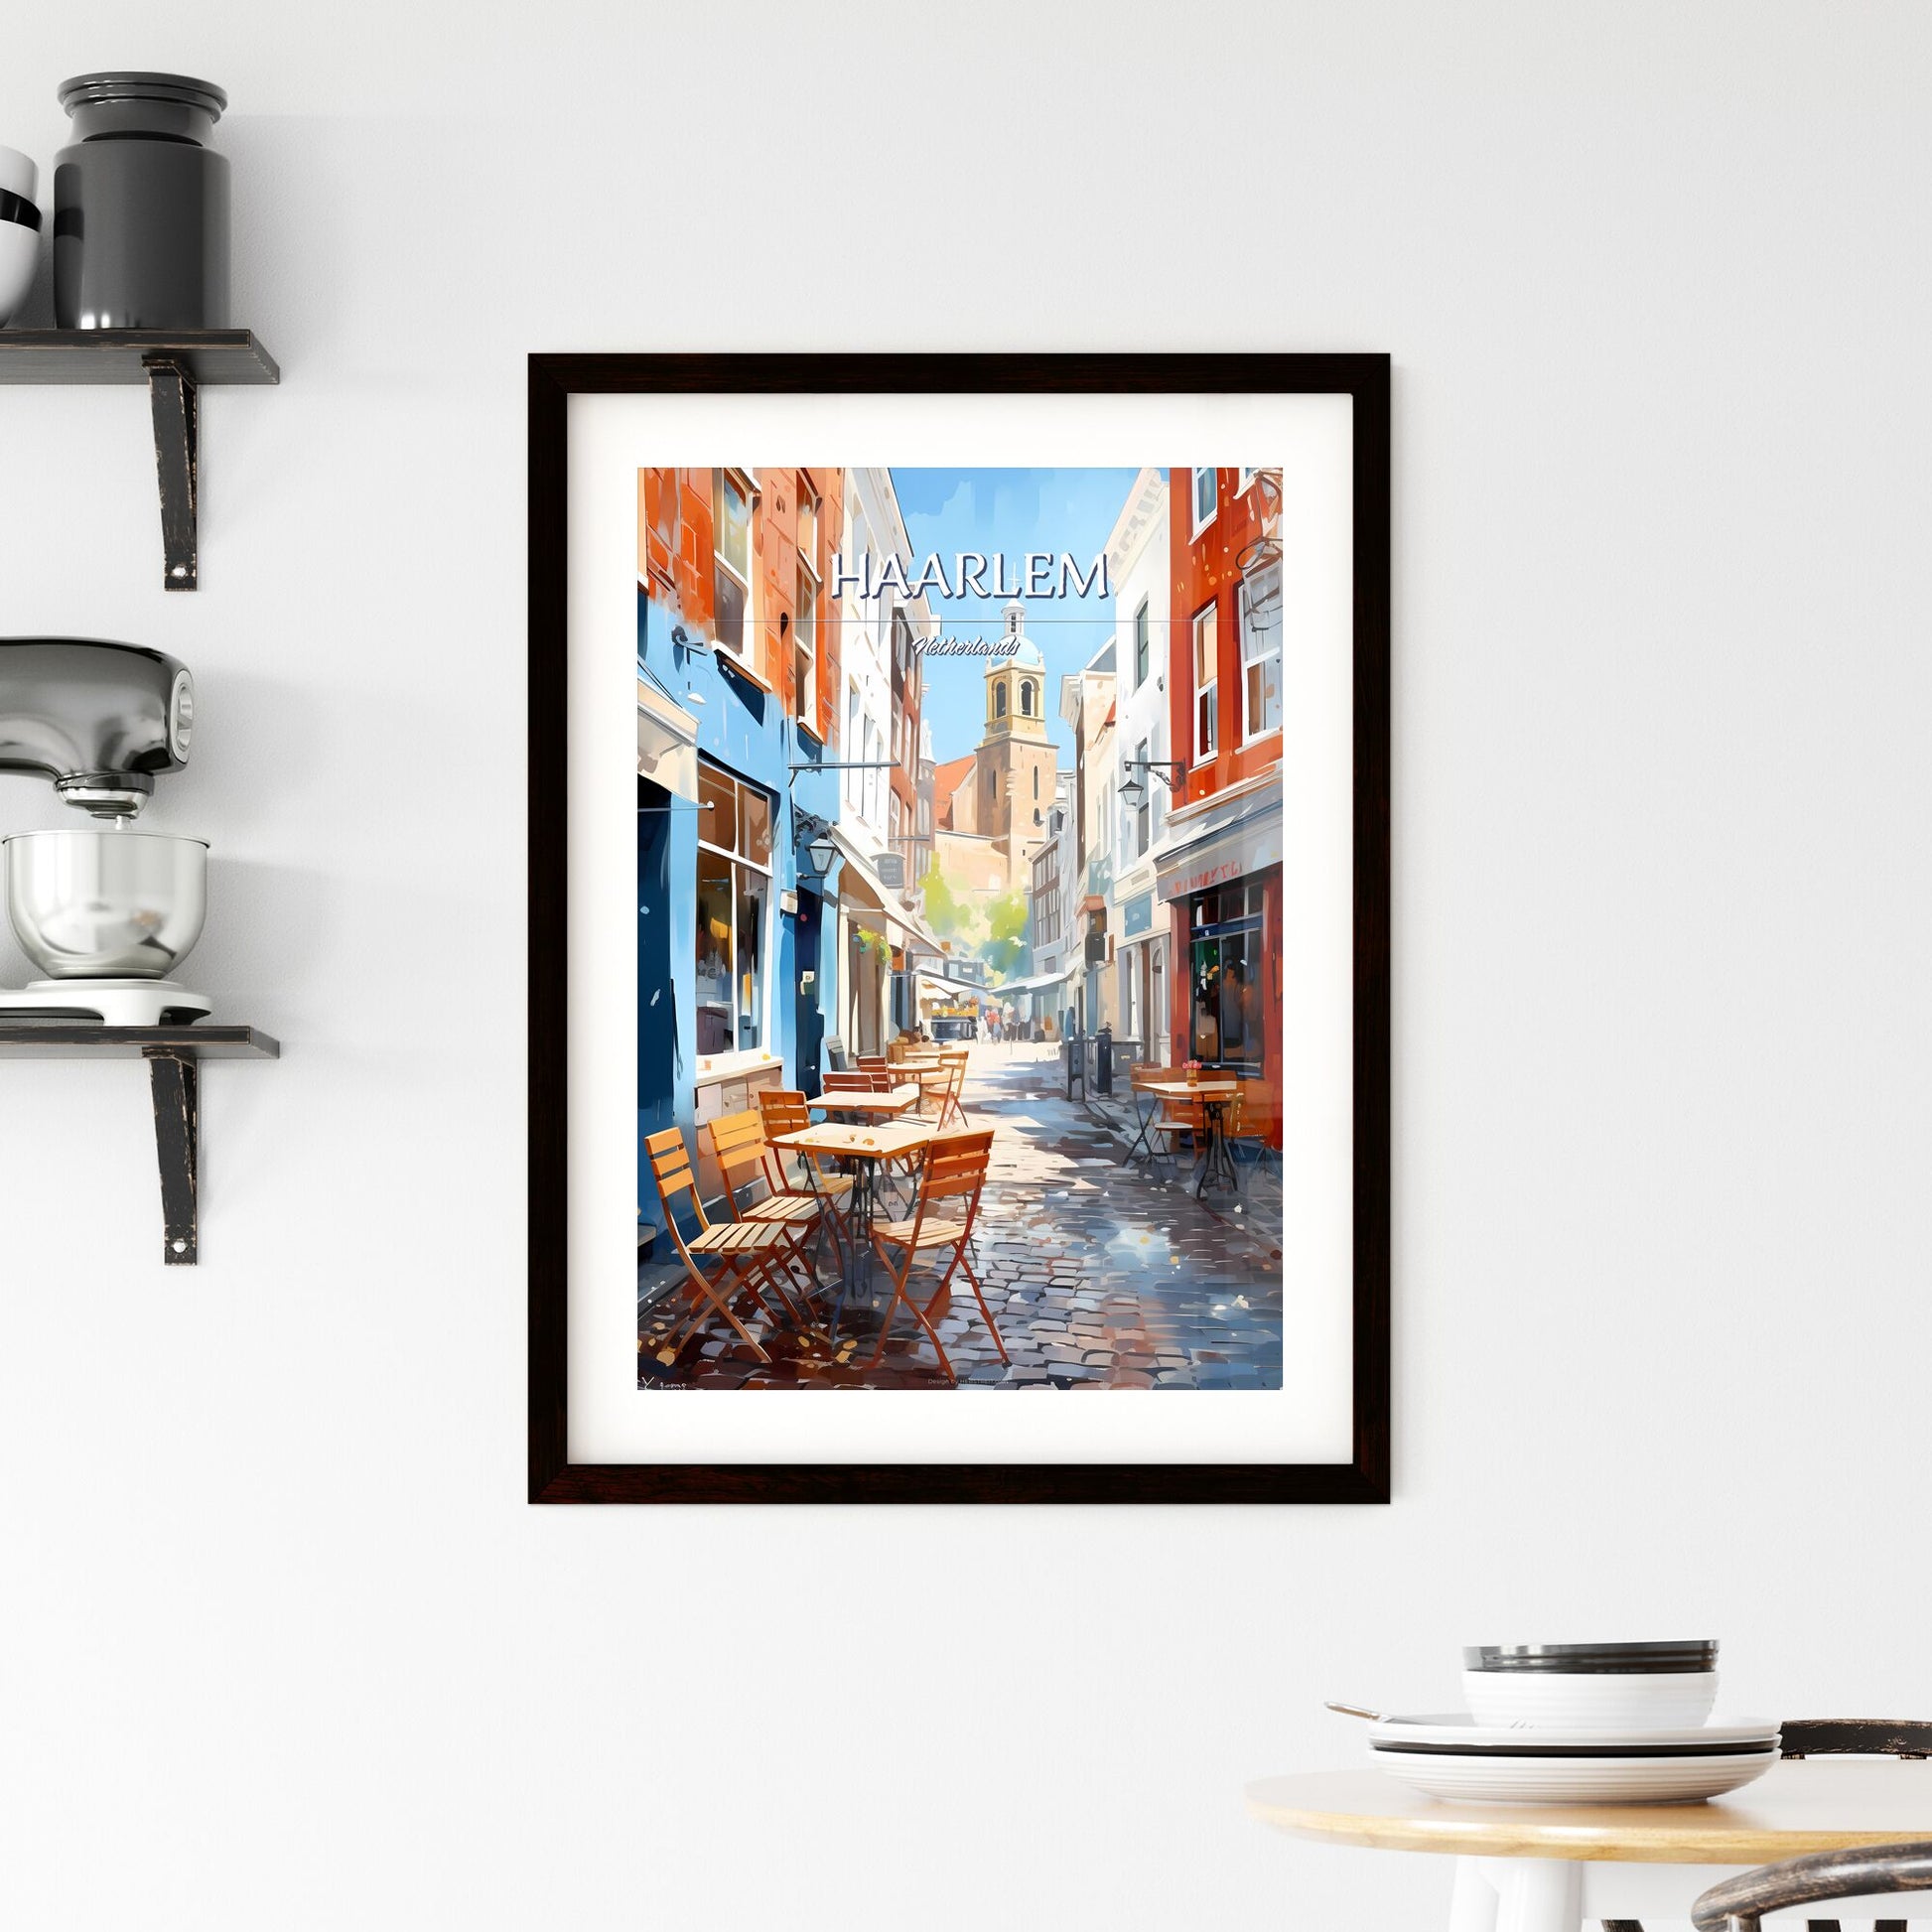 Haarlem, Netherlands - Art print of a street with tables and chairs in a city Default Title